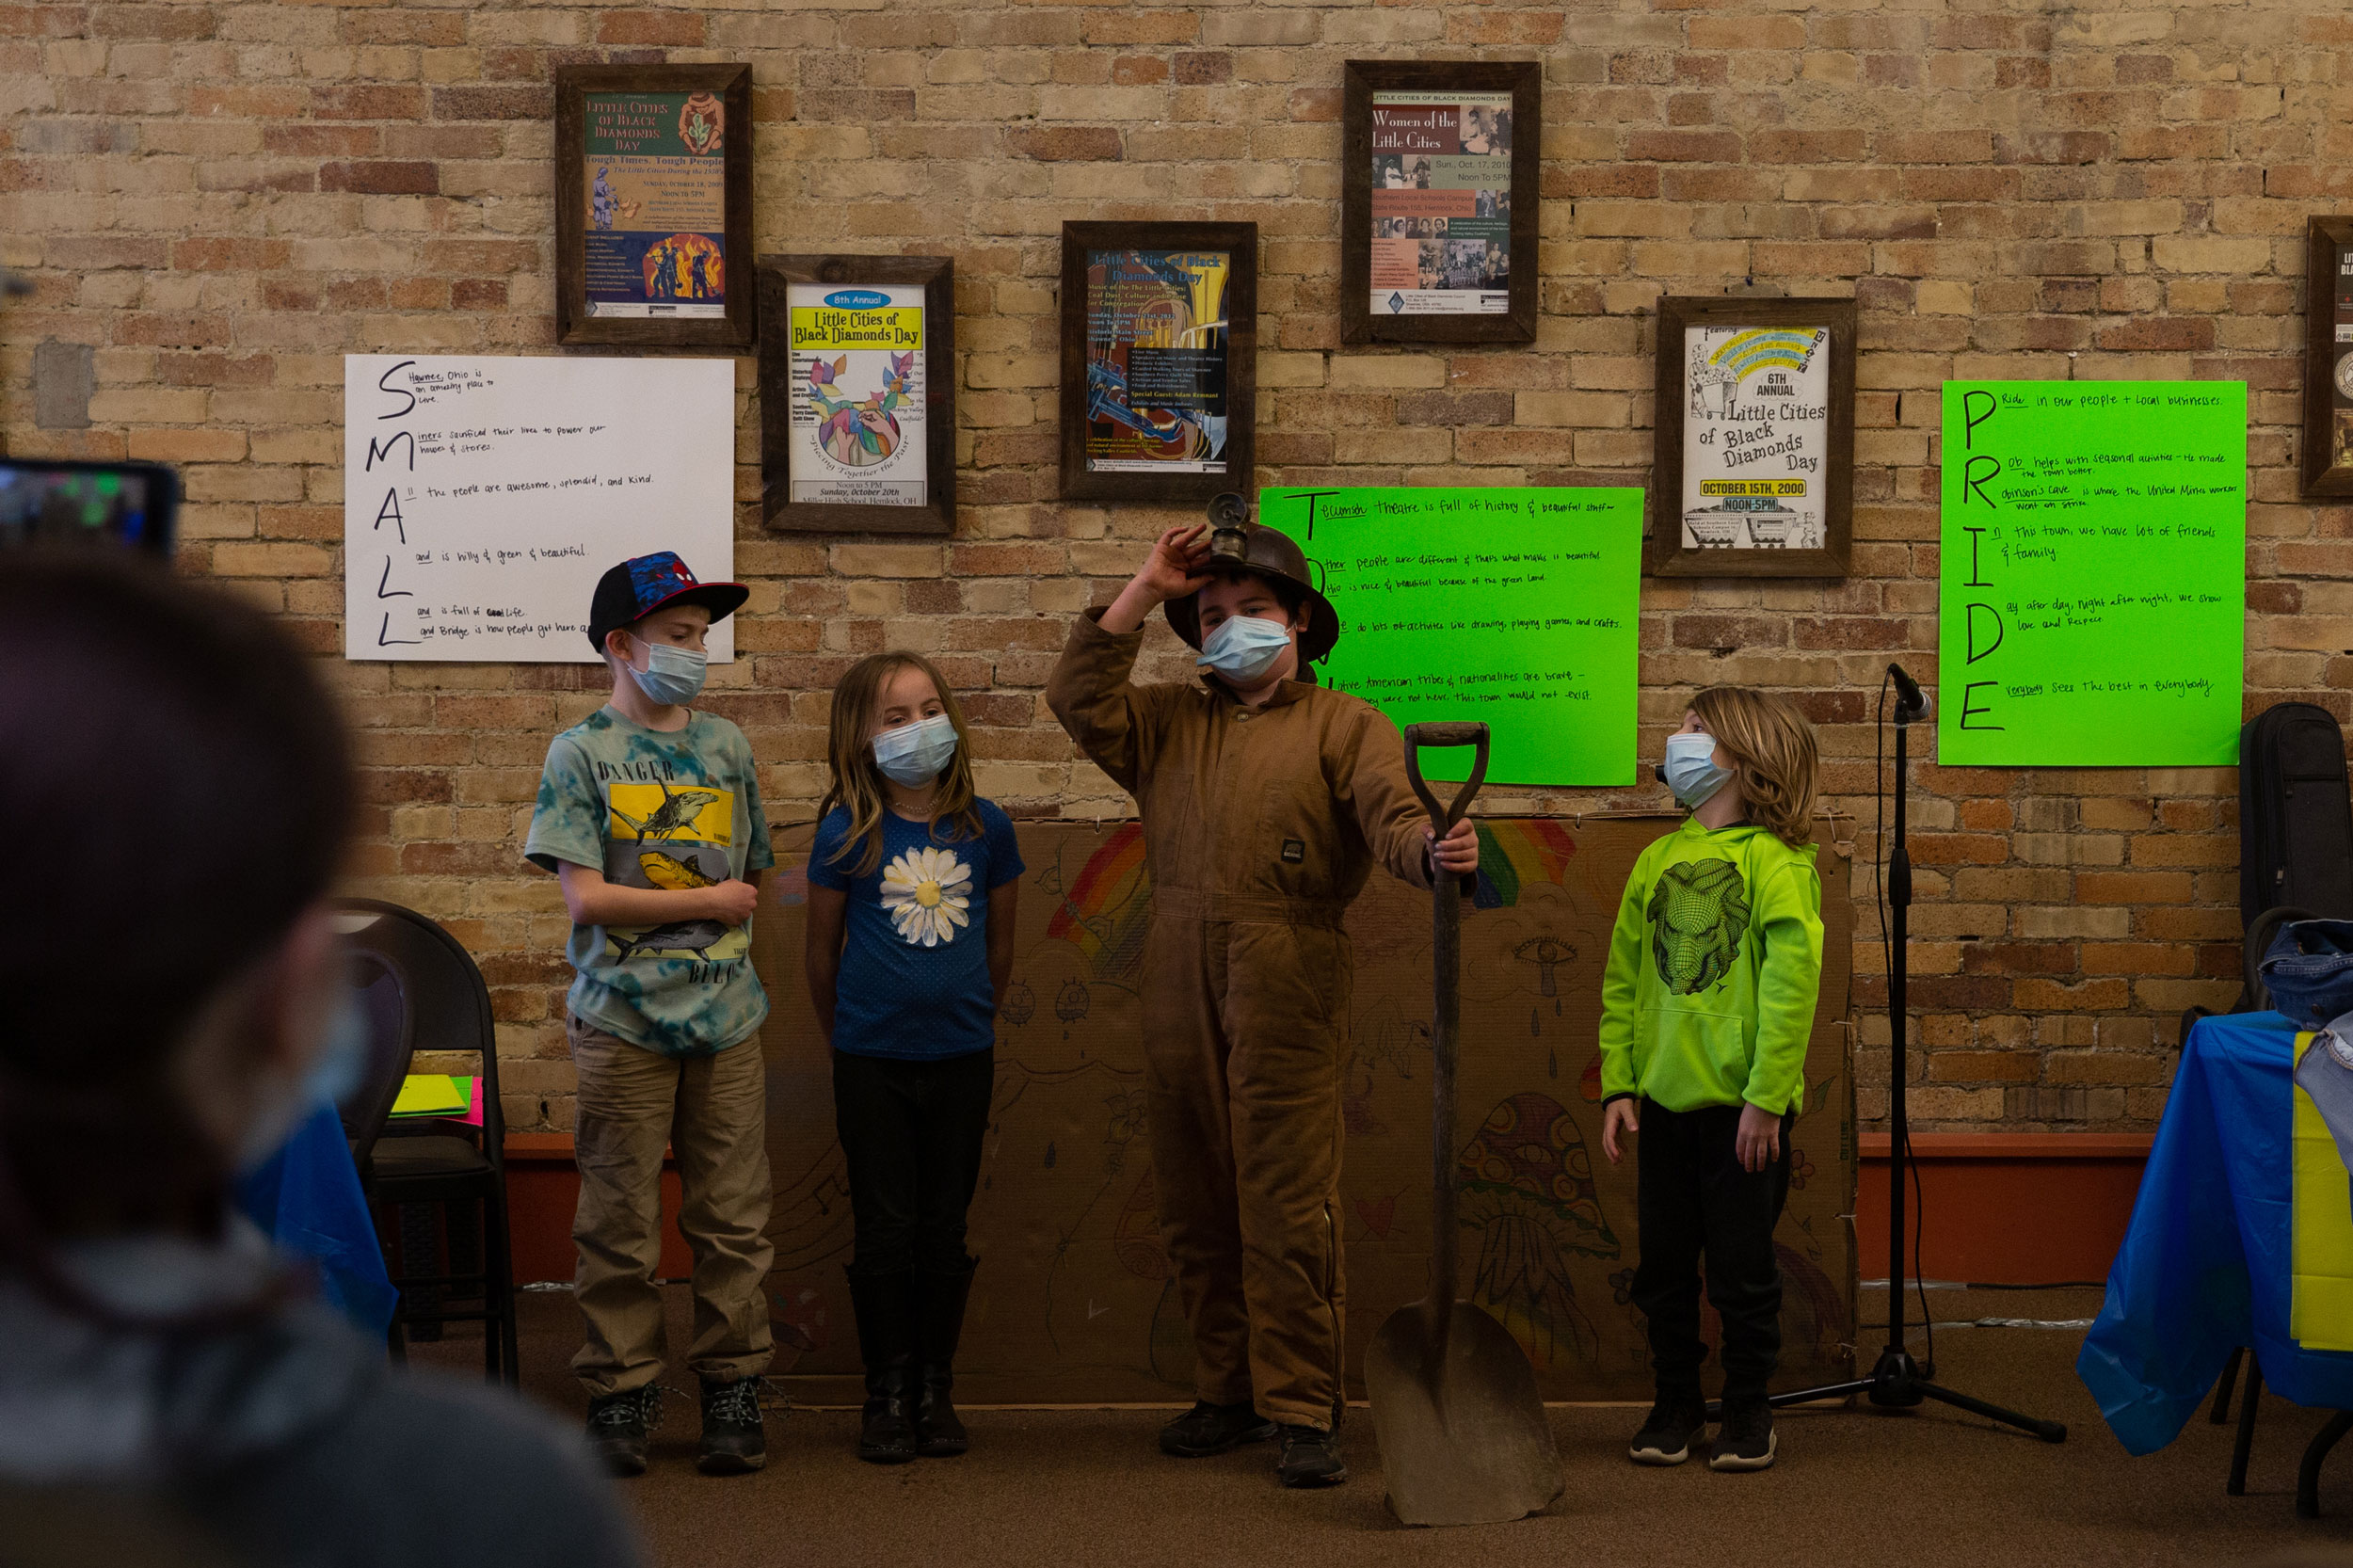 Rhys Westenbarger, middle right, tips his helmet up as part of his coal miner costume
during the puppet show wrapping up Saturday Matinees at the Tecumseh Theater on
Saturday, March 26, 2022. (Jesse Jarrold-Grapes)